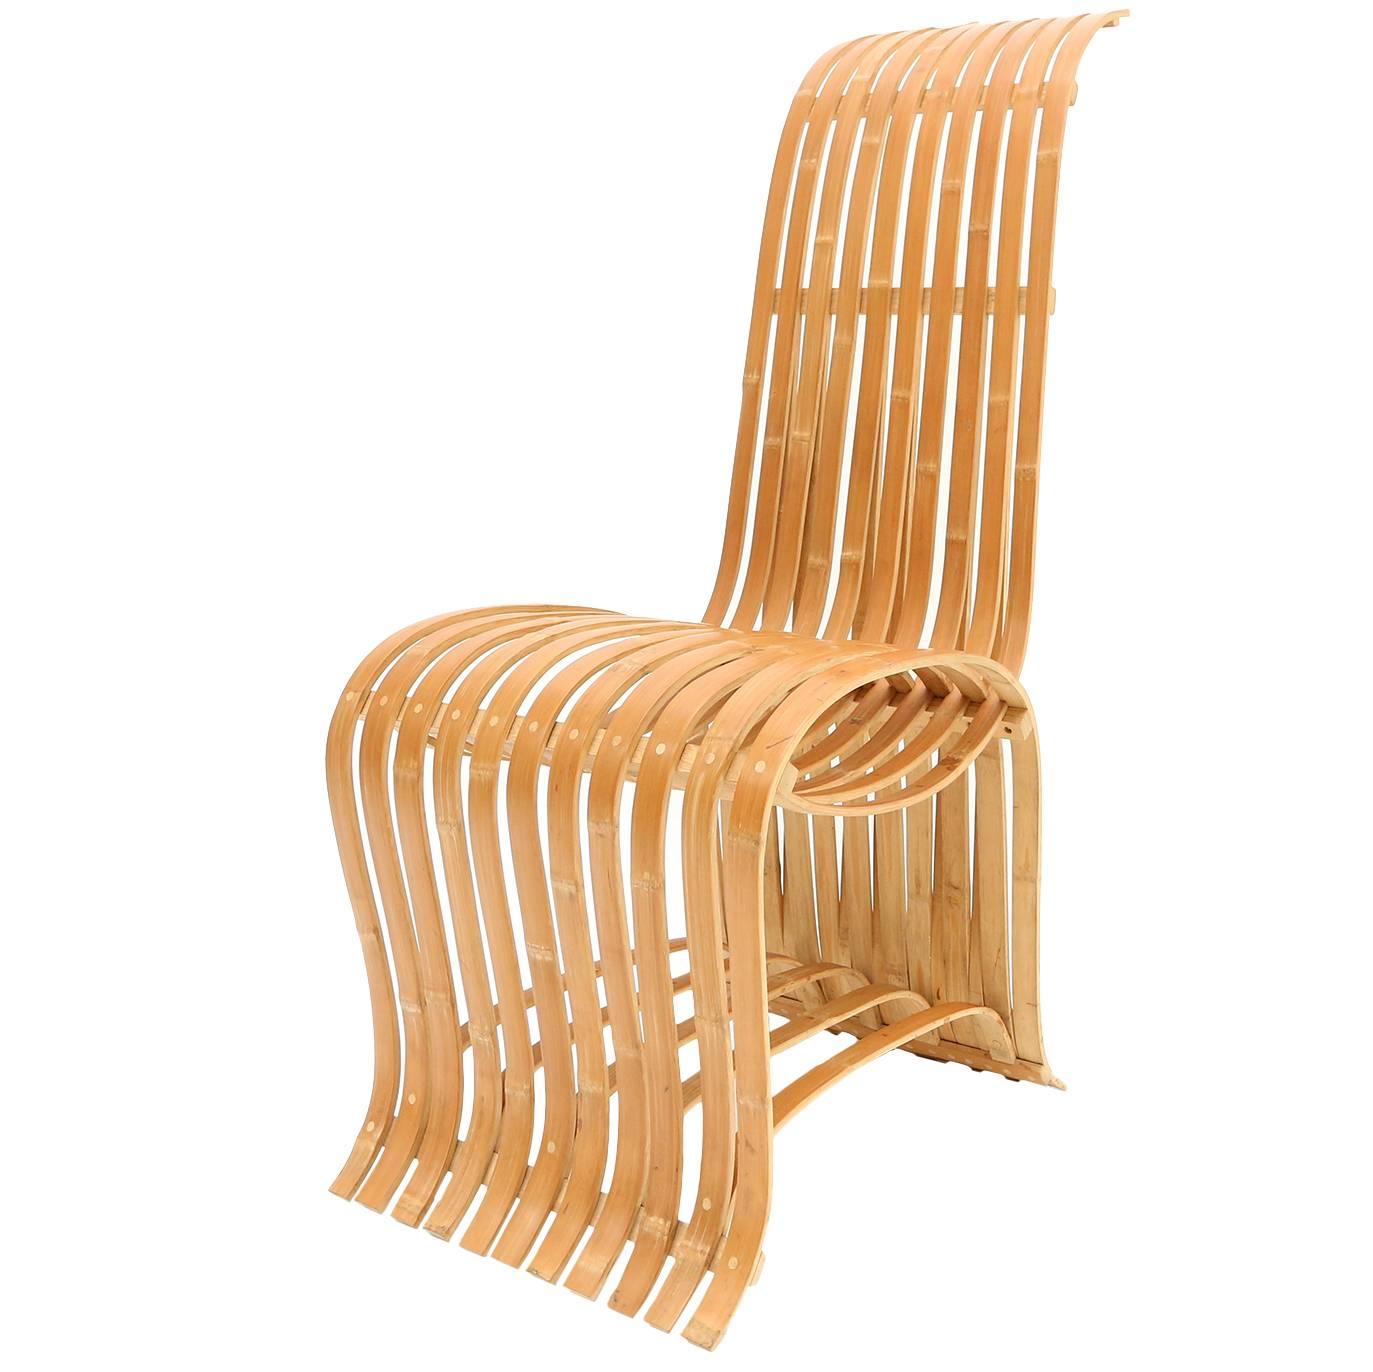 Midcentury Sculptural Bamboo Chair For Sale